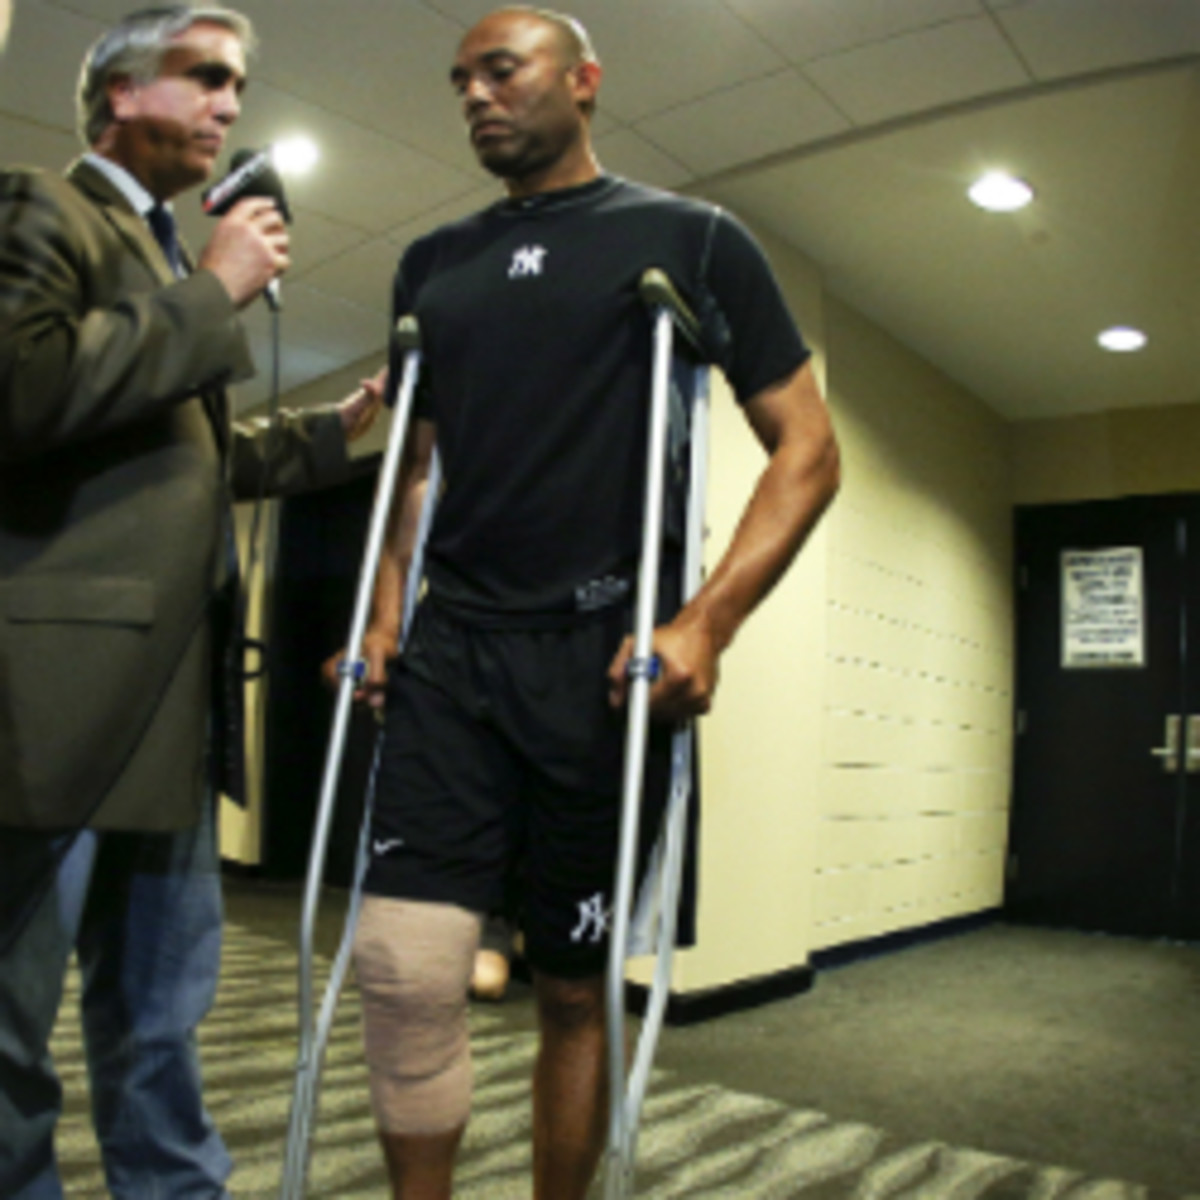 Yankees closer Mariano Rivera says his injured knee is about 95 percent healed. (Ed Zurga/Getty Images)